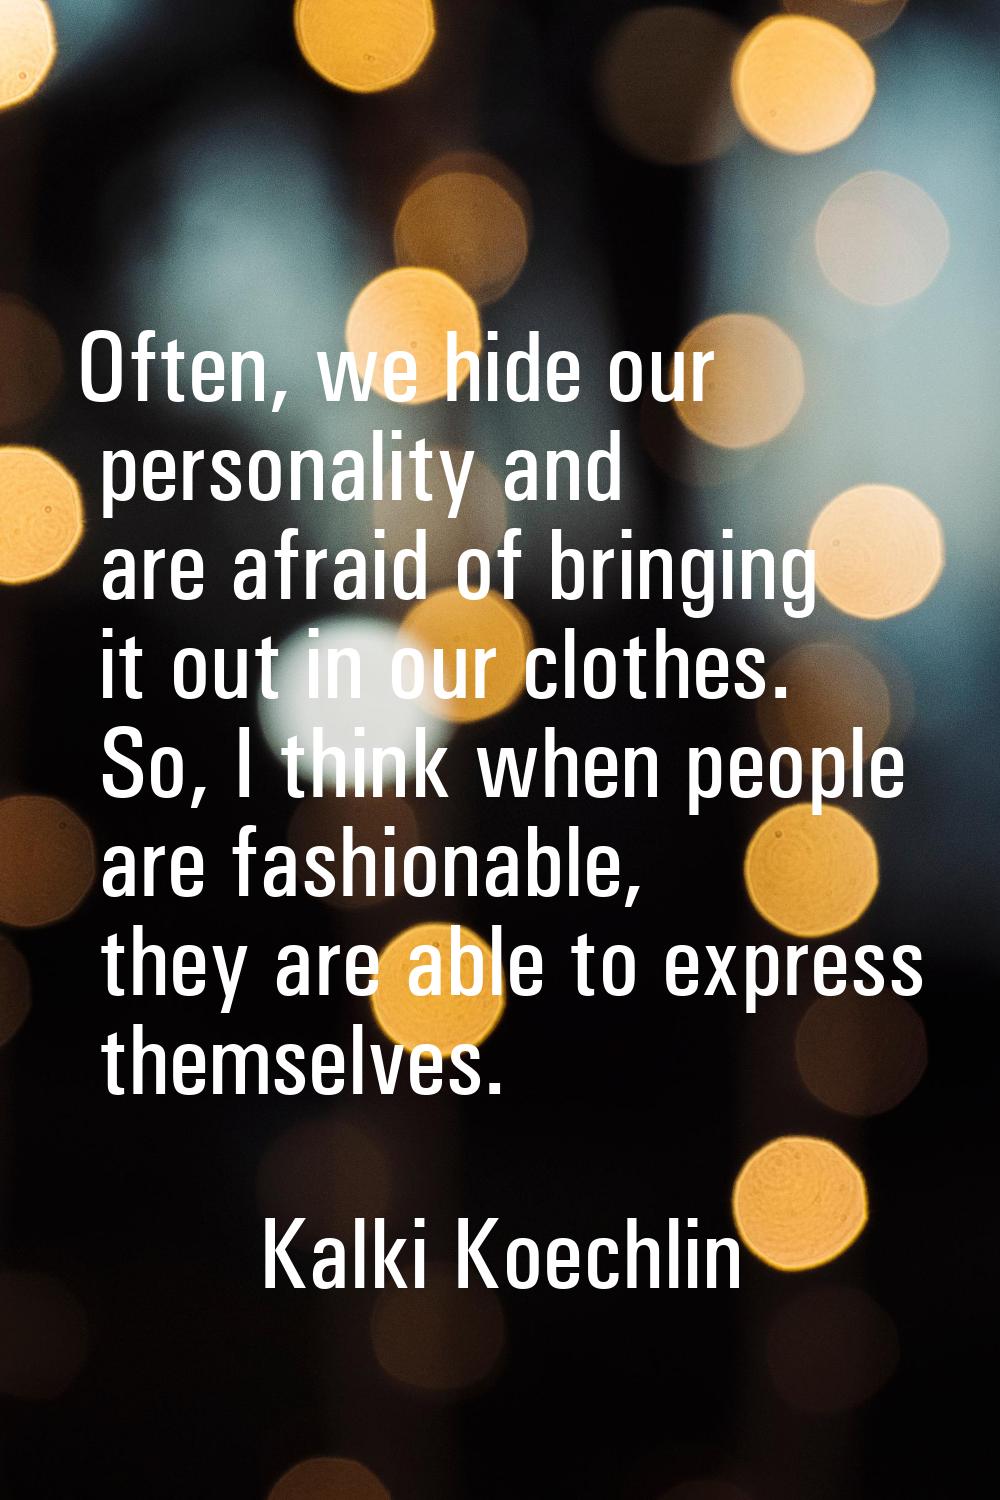 Often, we hide our personality and are afraid of bringing it out in our clothes. So, I think when p